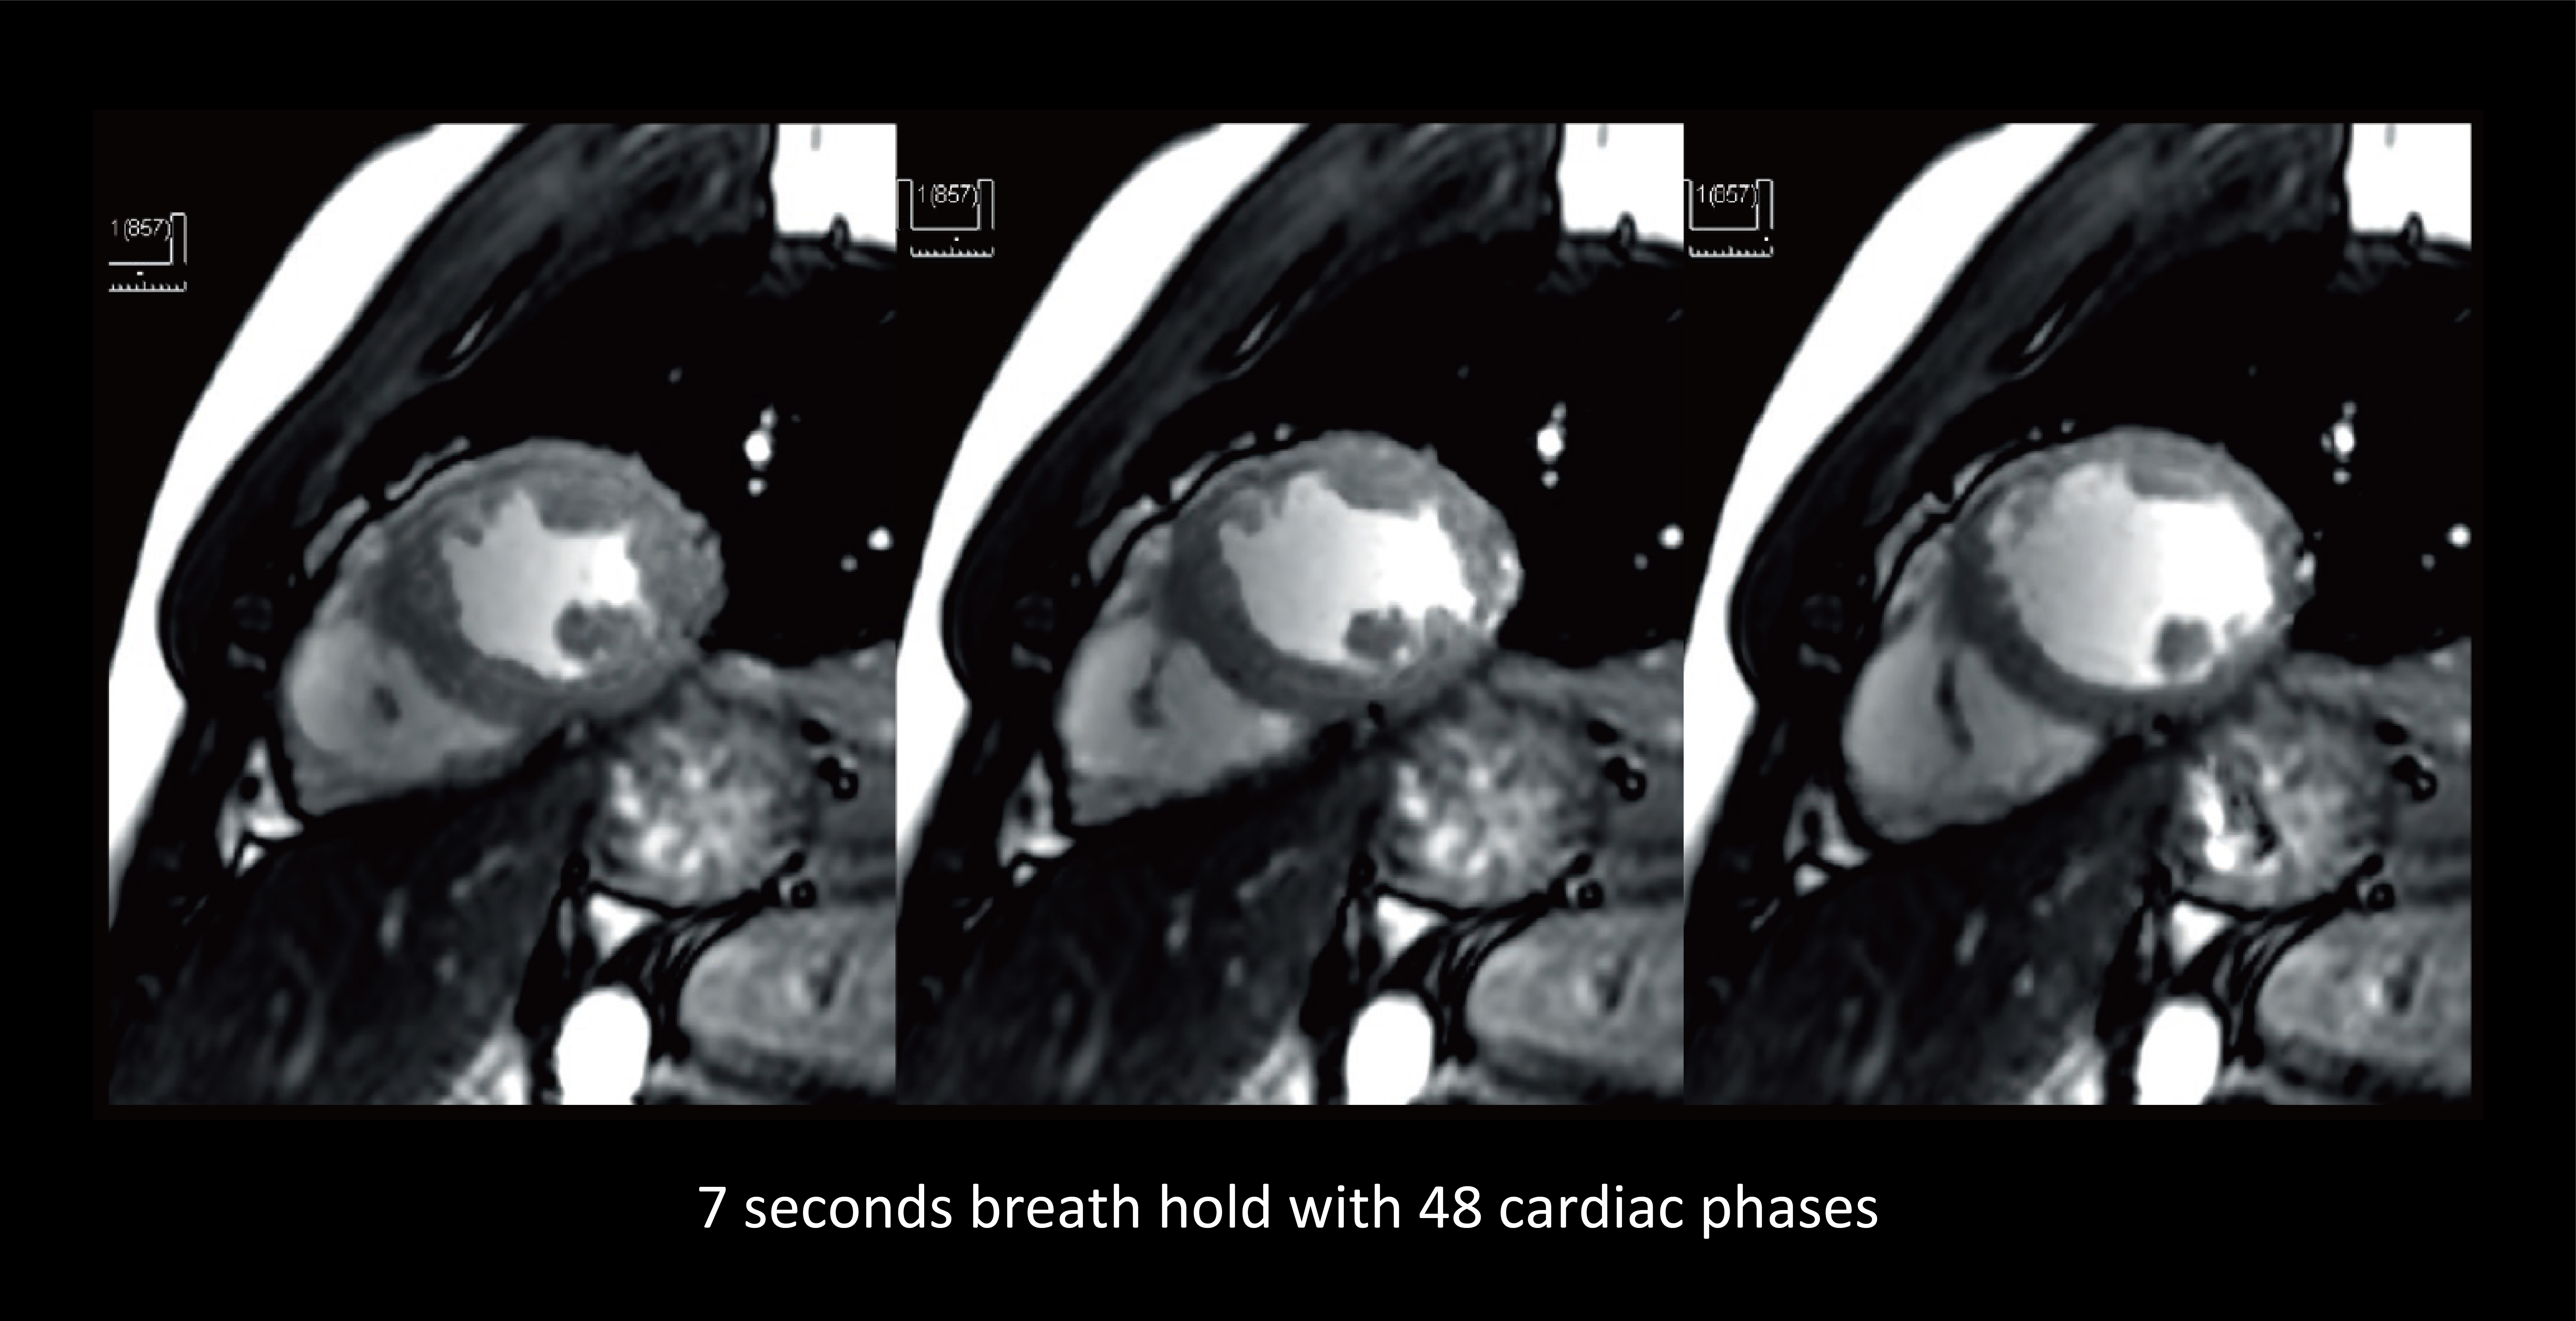 k-t SPEEDER: 7 seconds breath hold with 48 cardiac phases